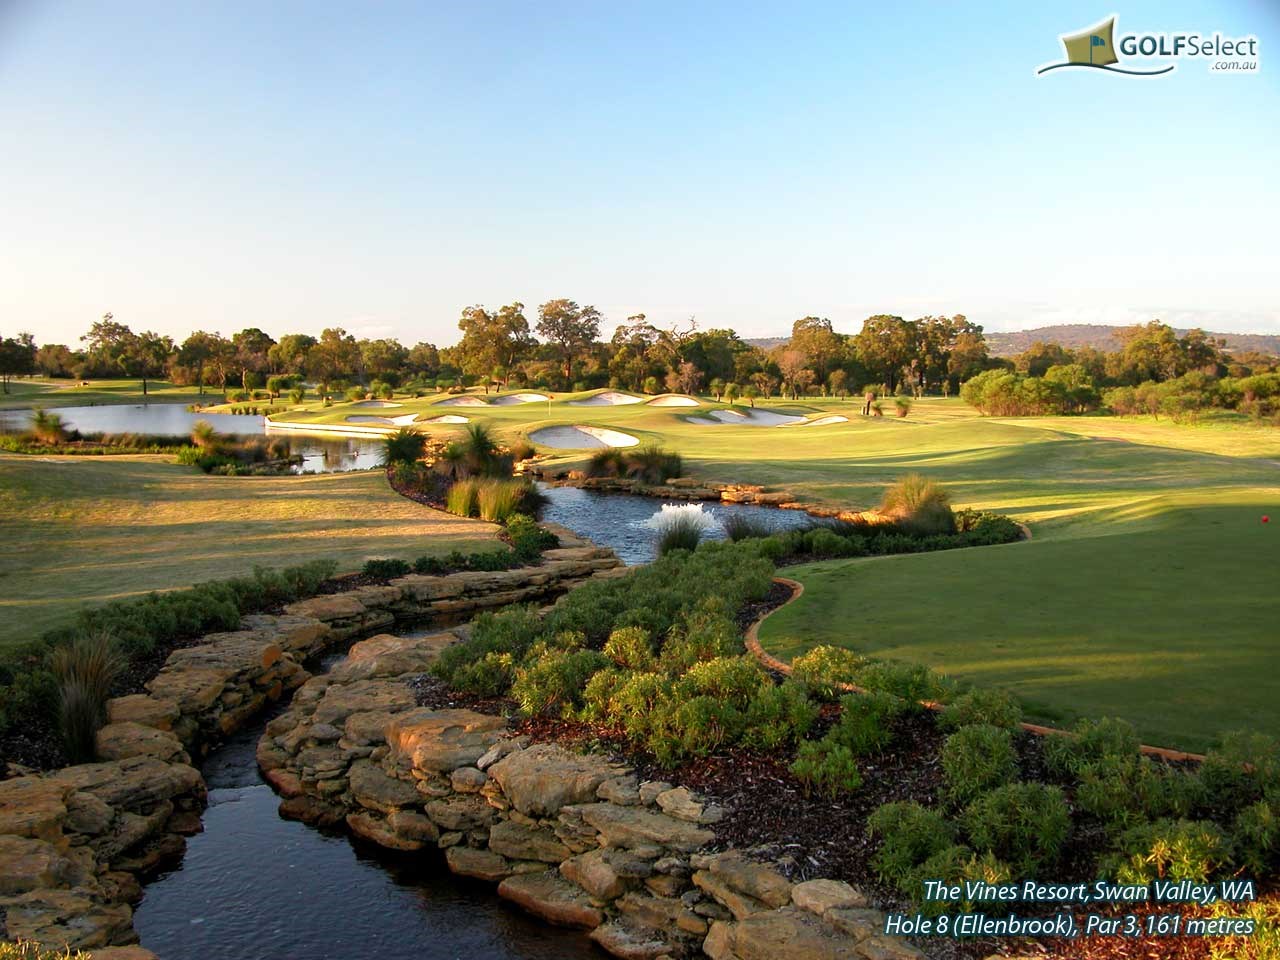 The Vines Golf and Country Club - Ellenbrook Hole 8 (Ellenbrook)